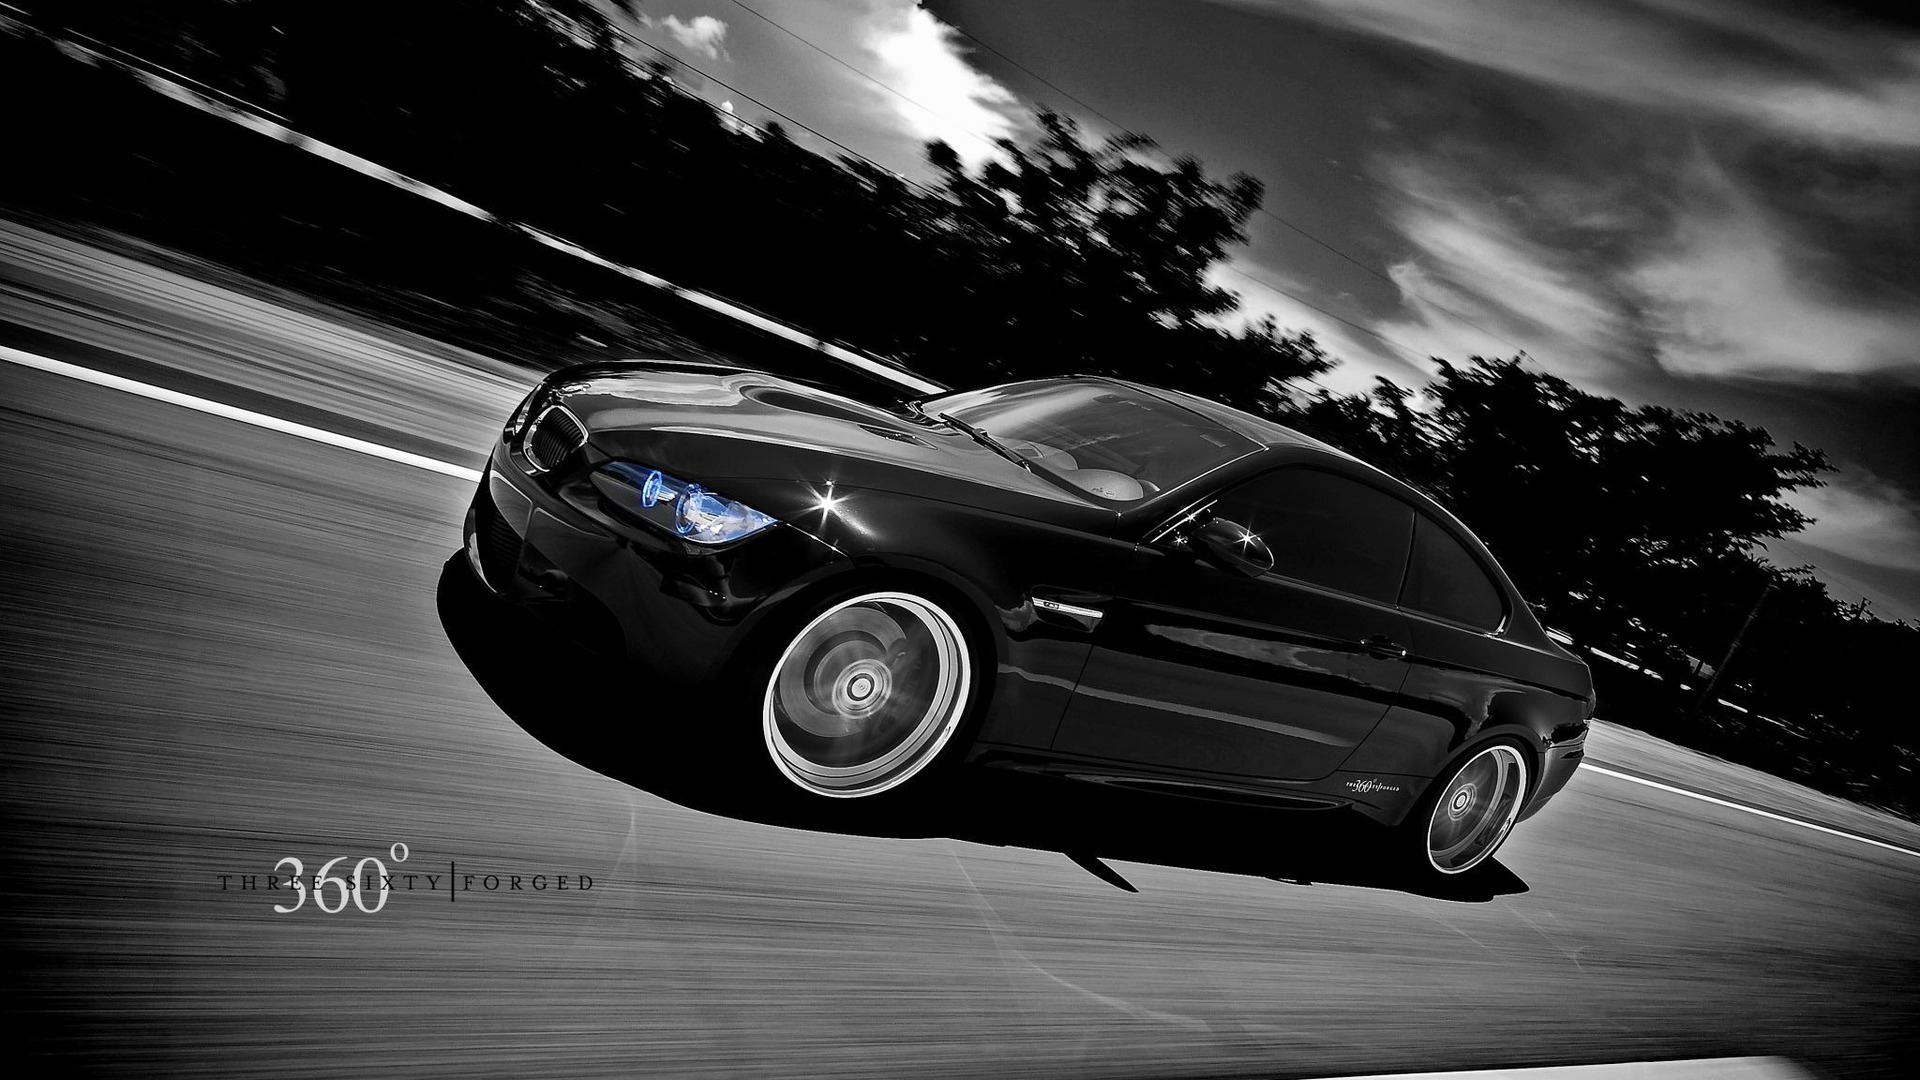 BMW Car 1920X1080 Pixels Full HD Wallpapers Collection   Tech Bug 1920x1080